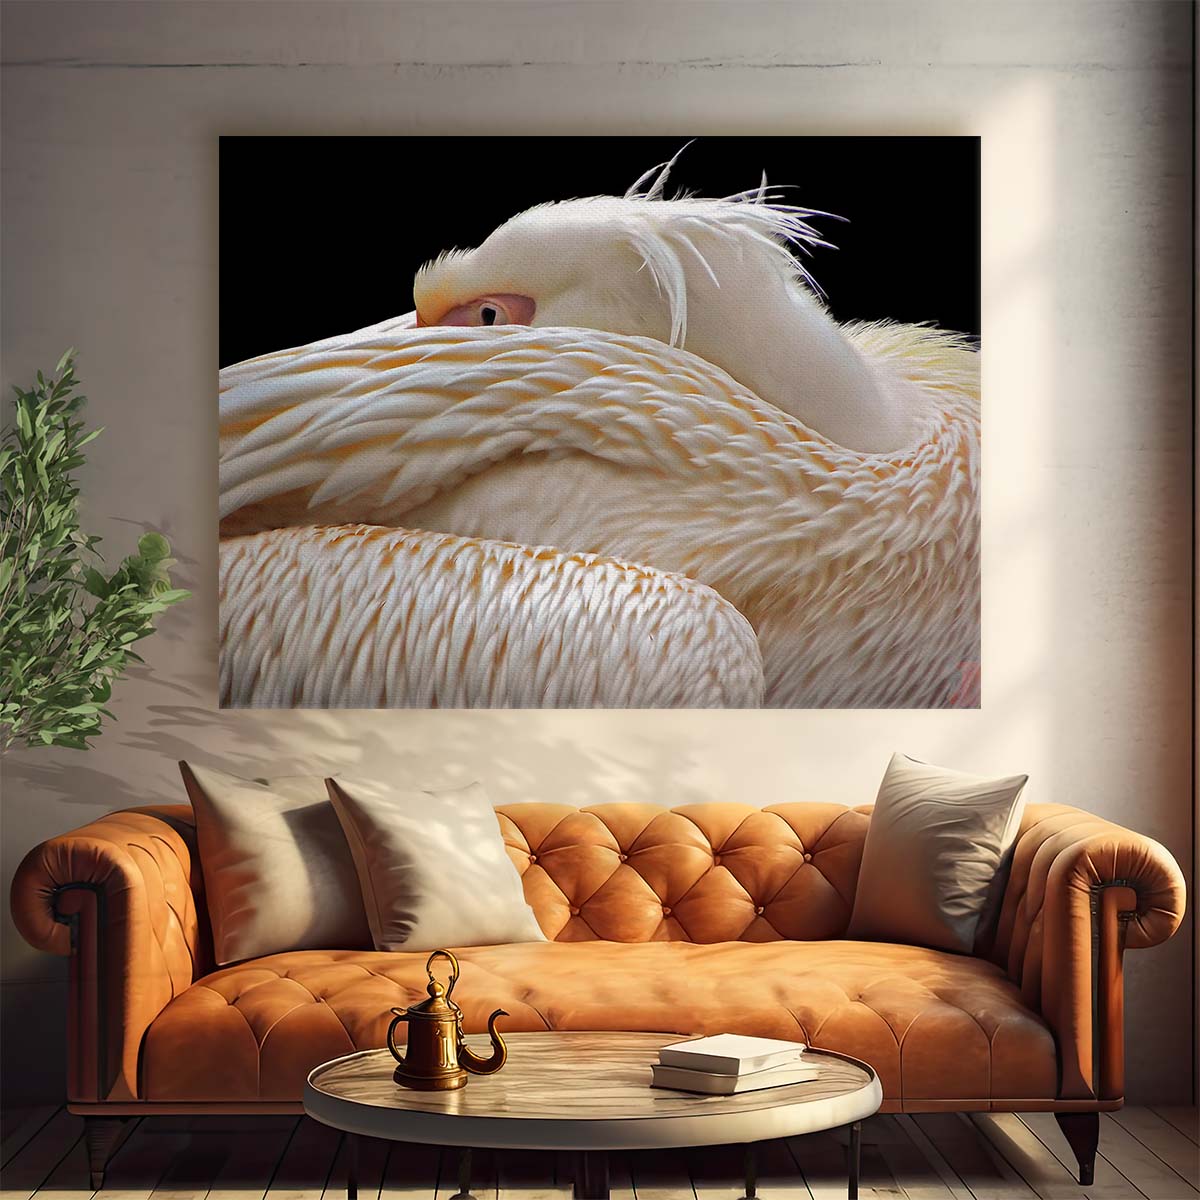 Abstract Hidden Pelican Curves Lyon France Wall Art by Luxuriance Designs. Made in USA.